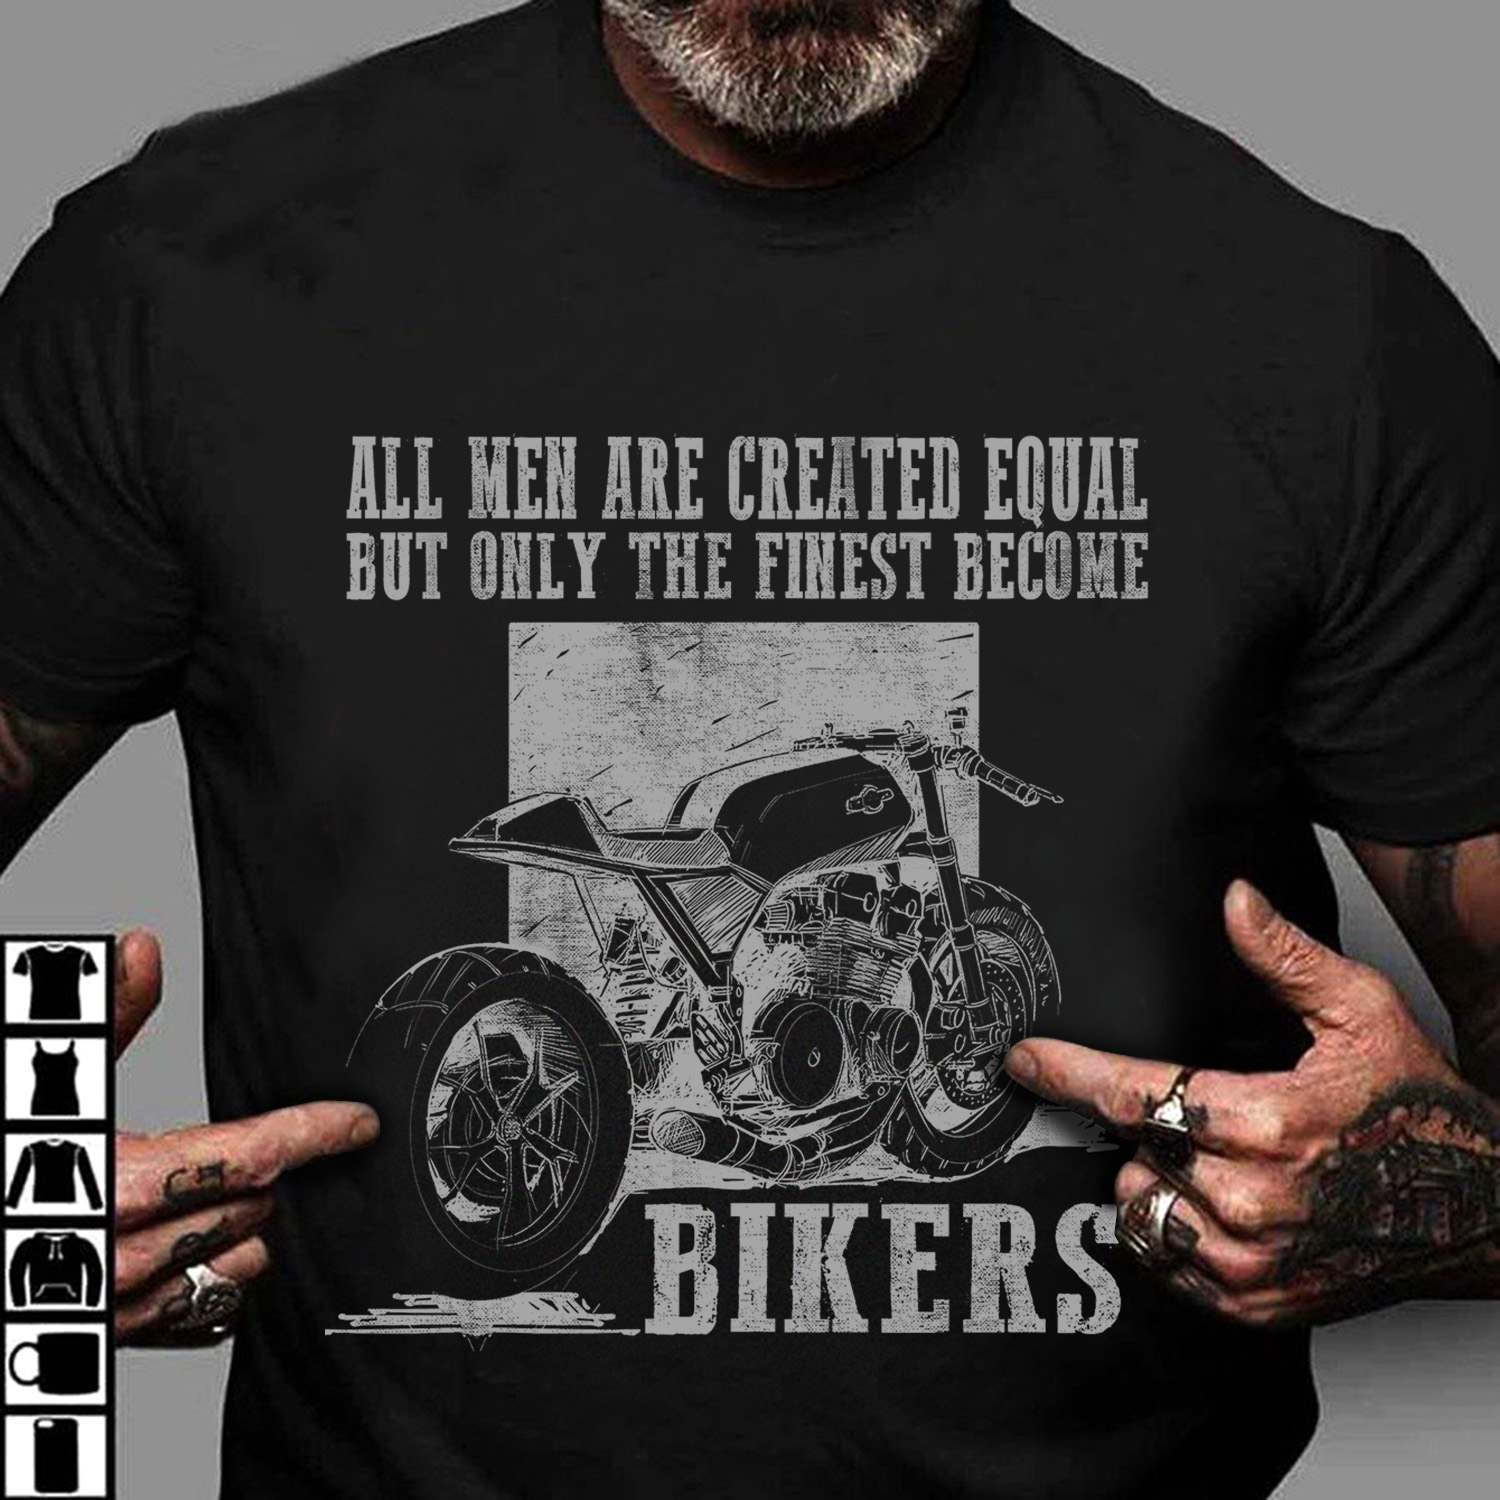 All men are created equal but only the finest become bikers - Men biker